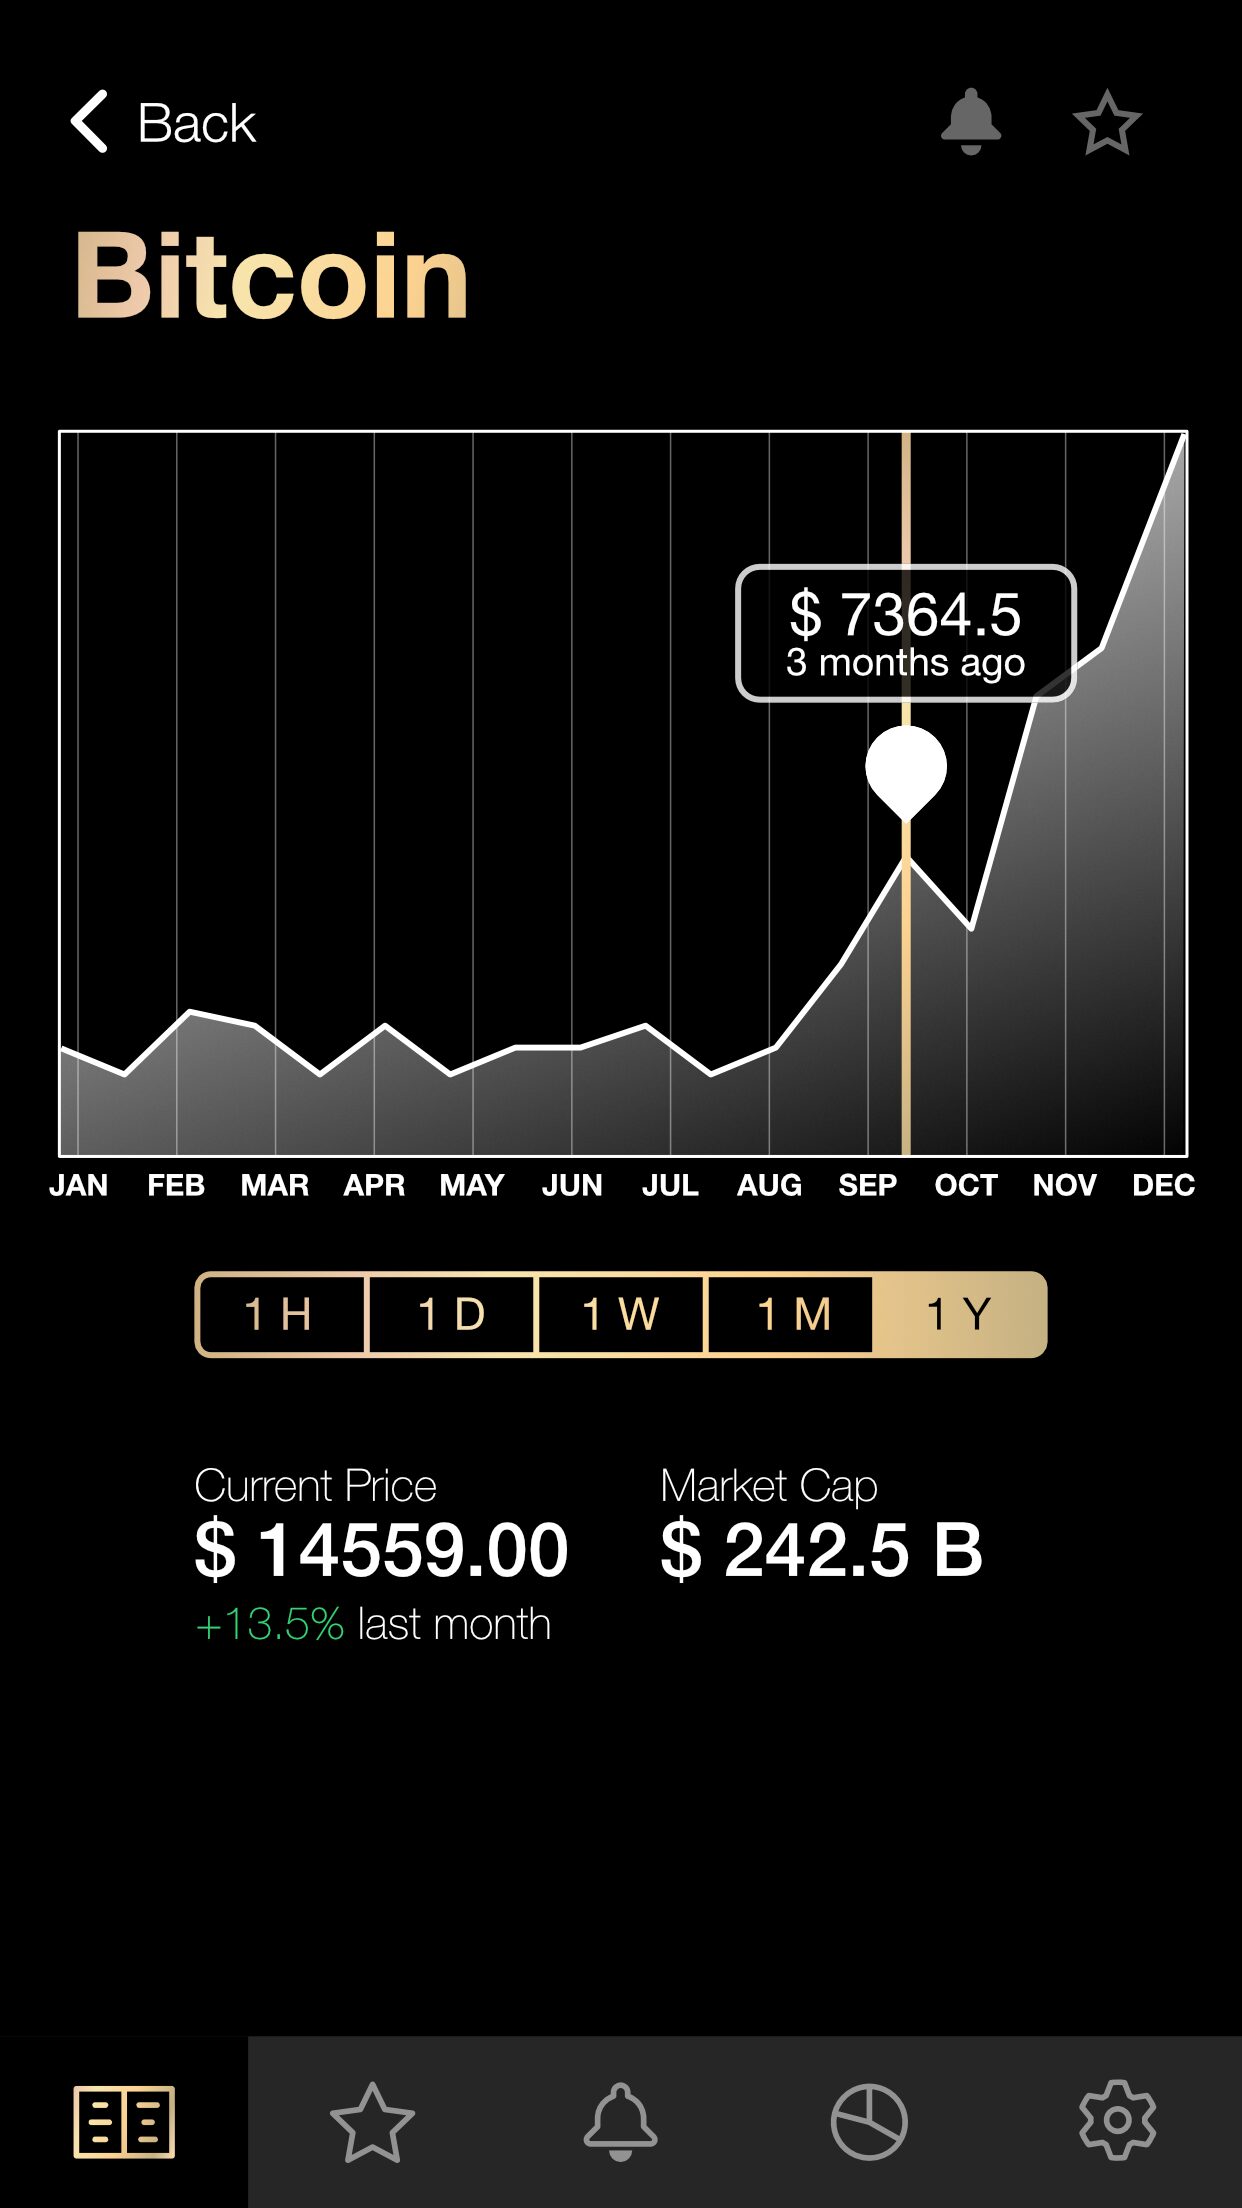 Crypto Price Tracker Showing In A Graphical View Developed By 16 Year Old Harshita Arora@dontgiveupworld